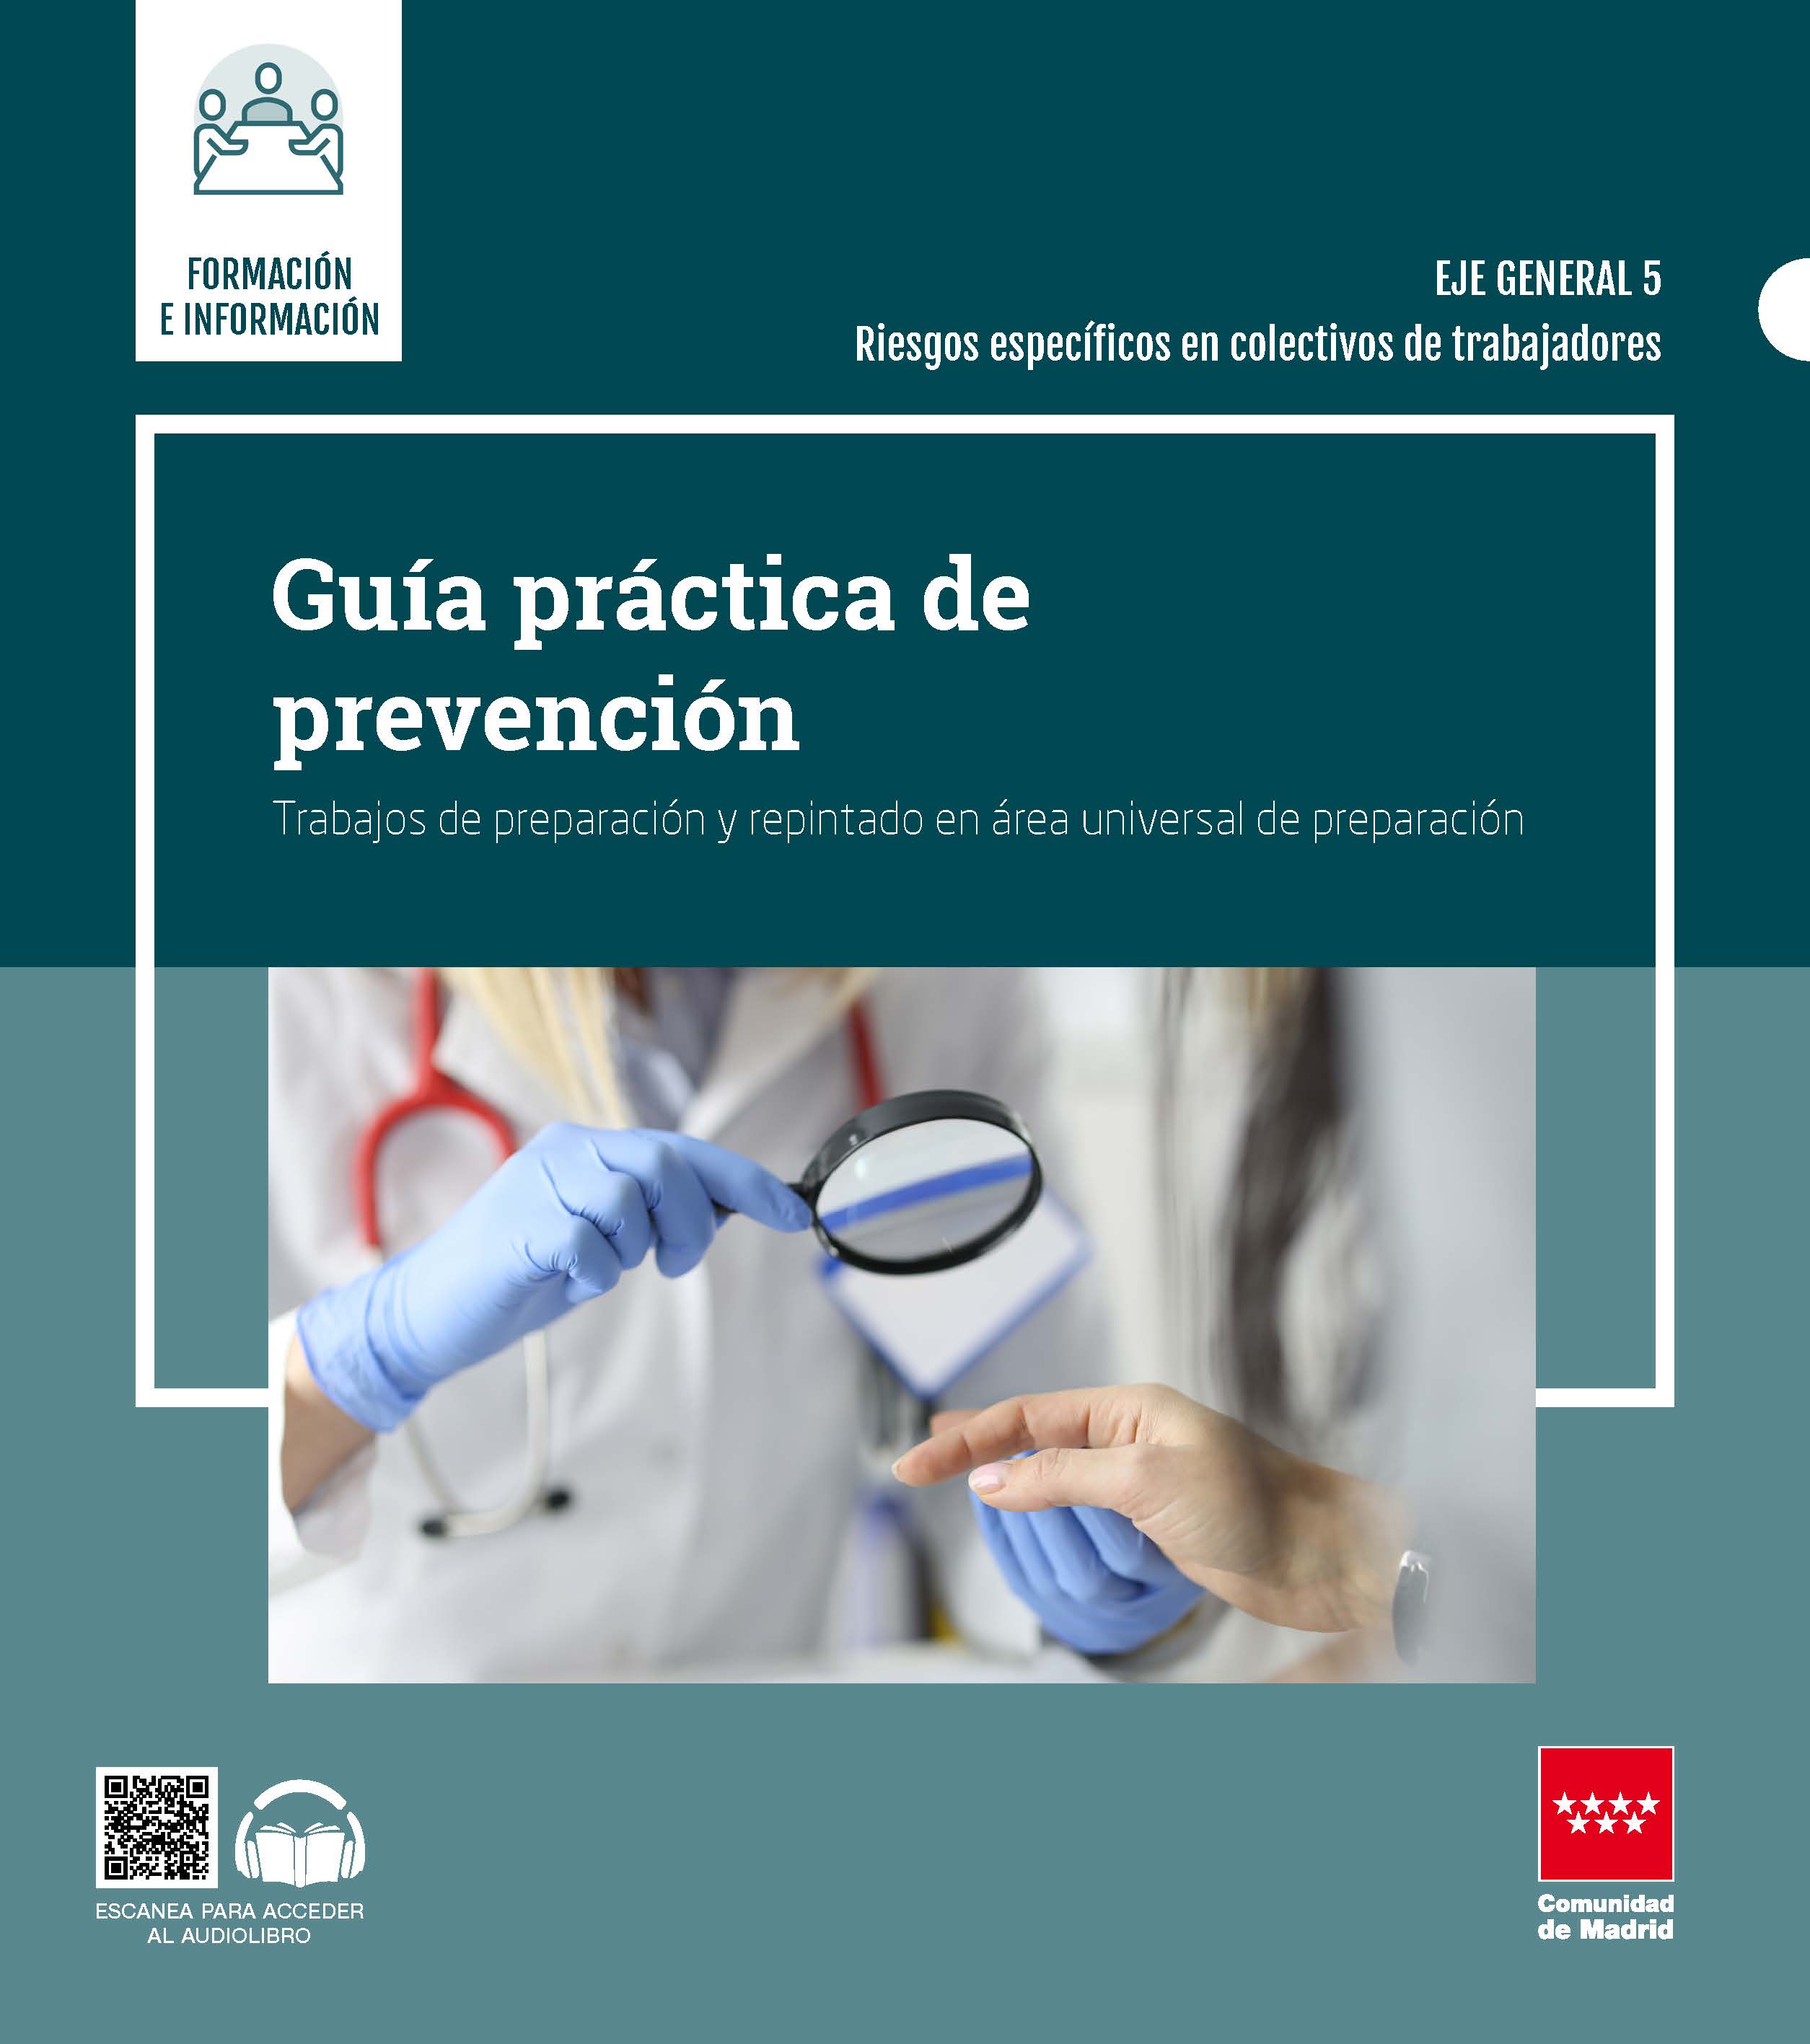 Cover of Practical prevention guide Preparation and repainting work in universal preparation area